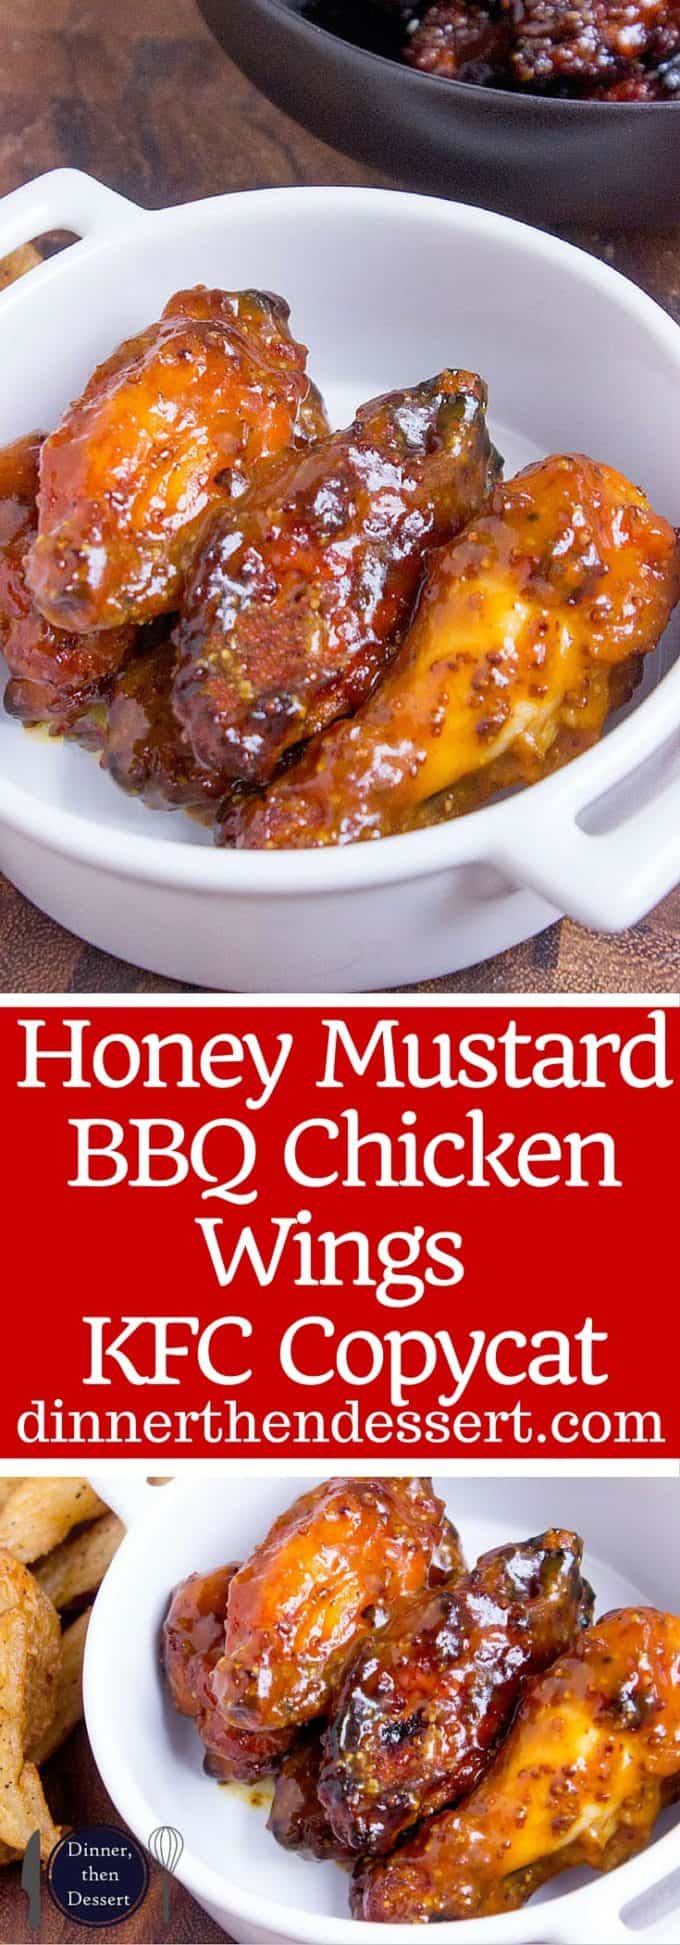 Tossed in a honey mustard and BBQ sauce, these chicken wings will be the hit of your game day party. dinnerthendessert.com